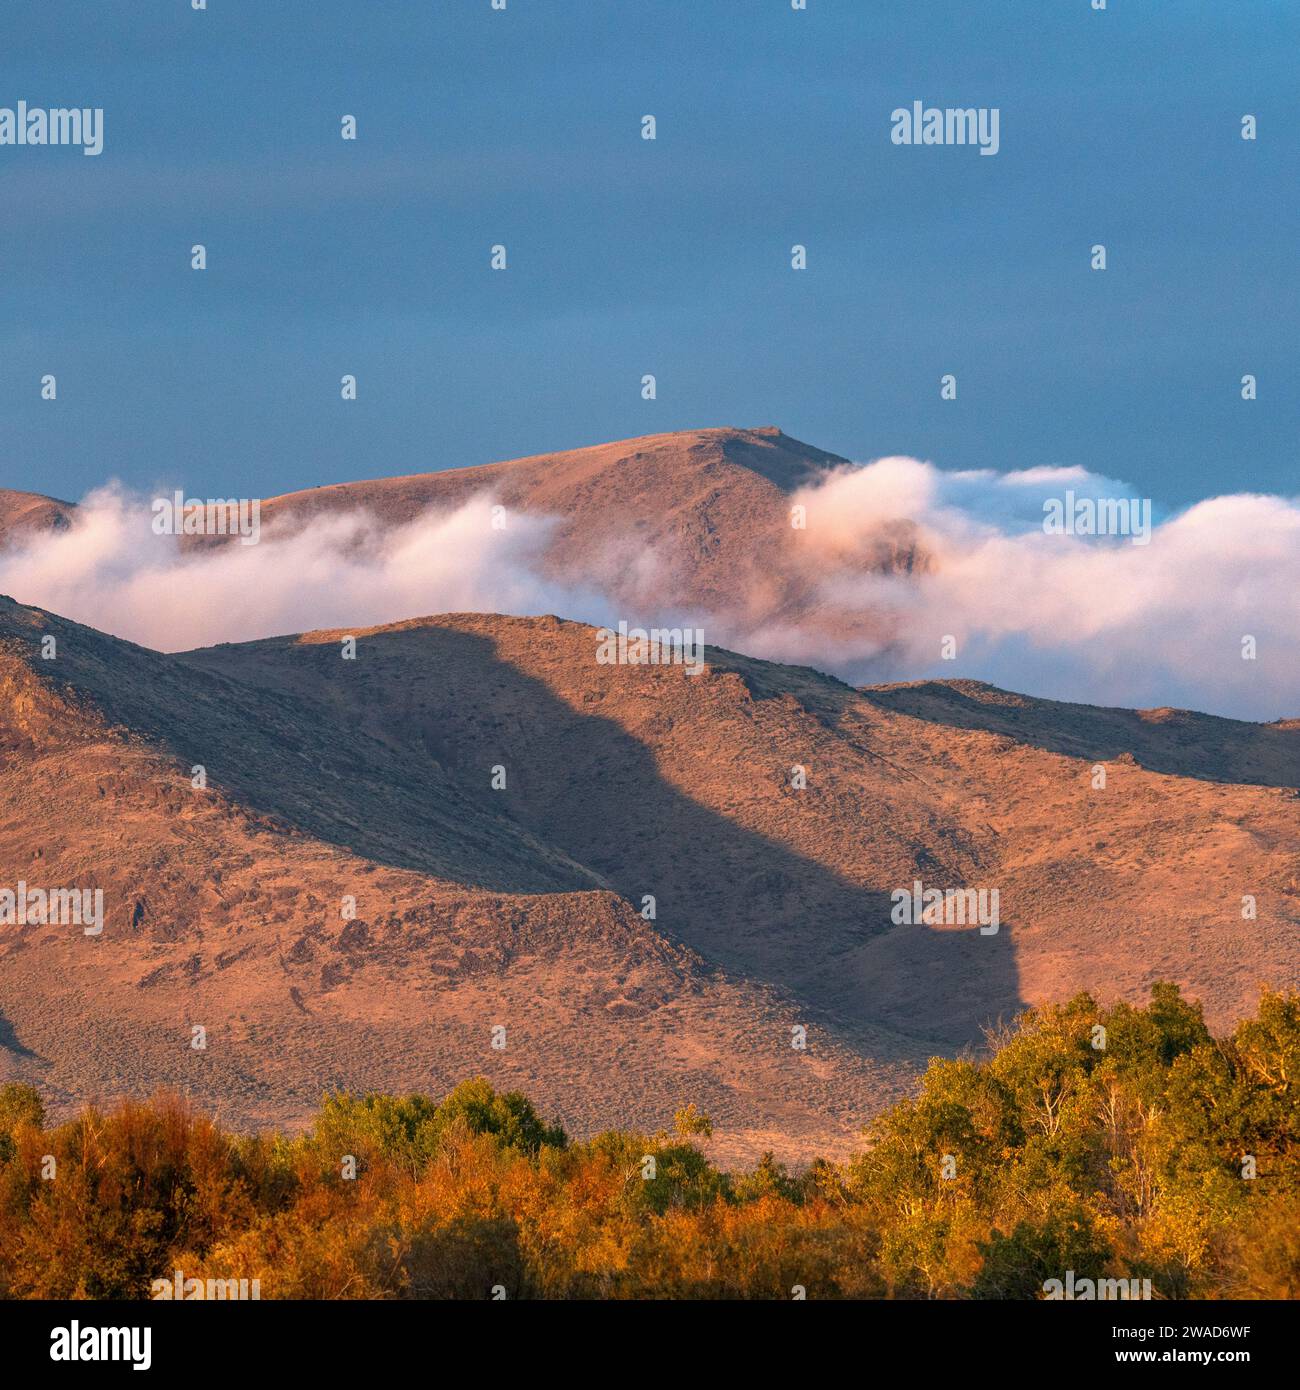 USA, Idaho, Bellevue, Clouds rolling over foothills in autumn Stock Photo